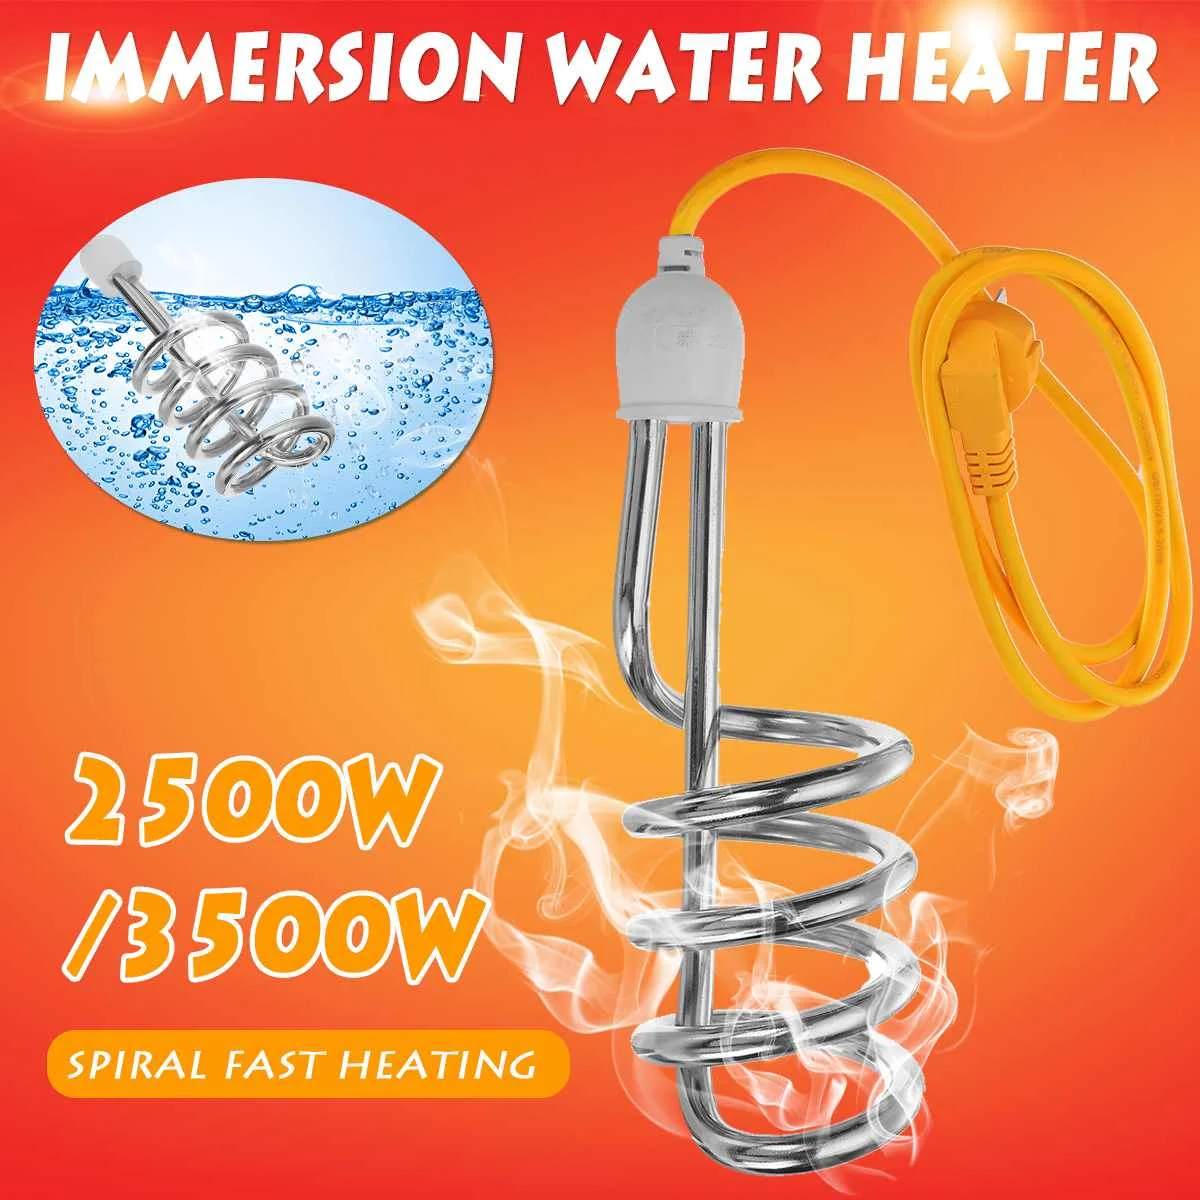 

3500W 220V Portable Immersion Electric Water Heater Boiler Heating Element Can Be Used Travel Bathroom Bathtub Swimming Pool